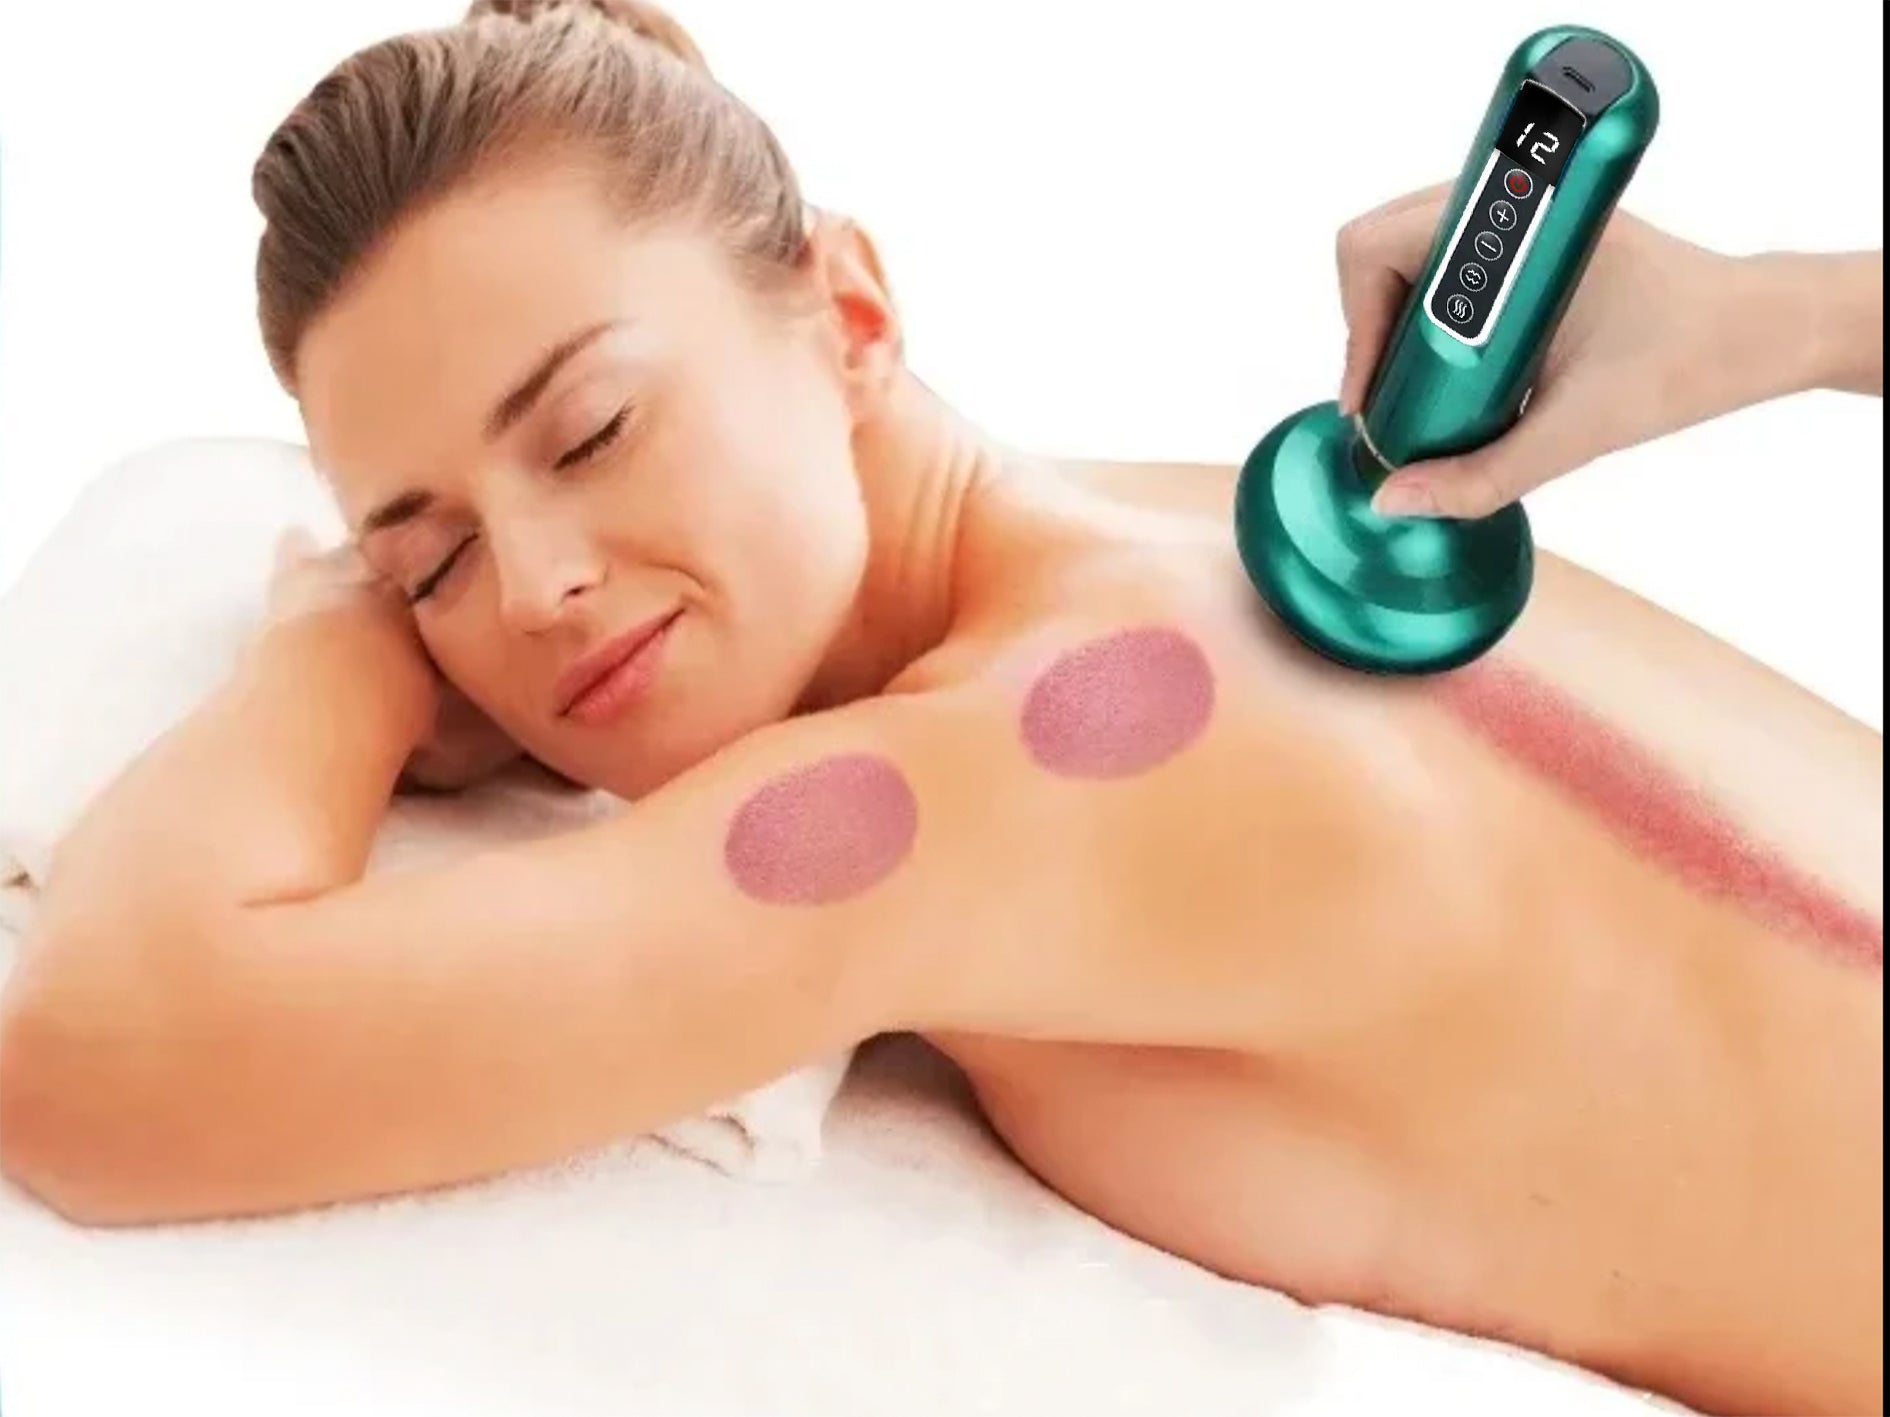 Purelife massage device with Gua Sha & Cupping